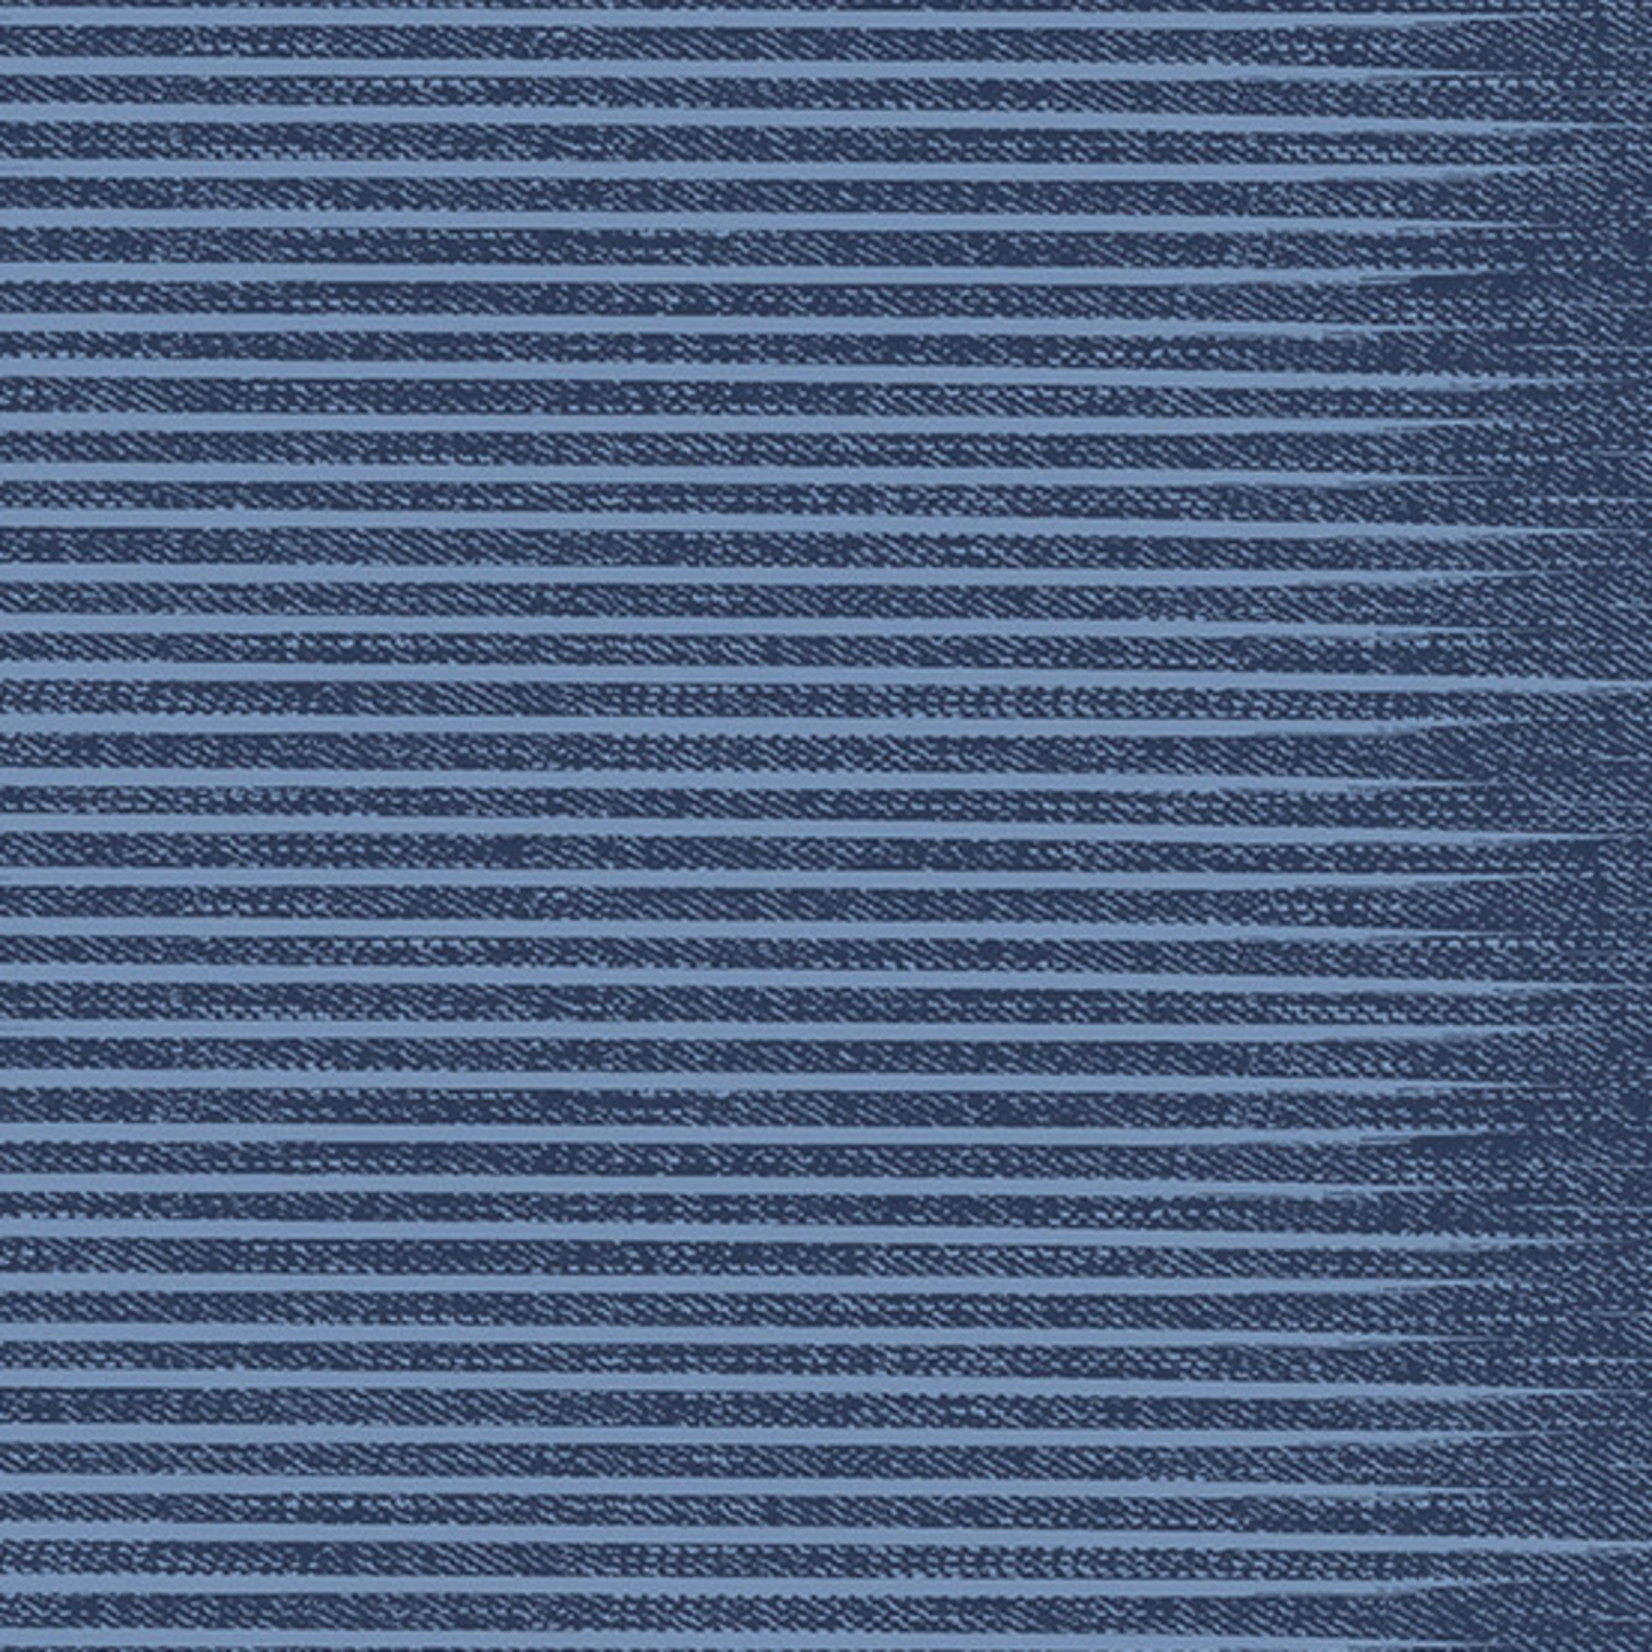 Andover Almost Blue, Stripe, Blue Rinsed, $0.20/cm or $20/m